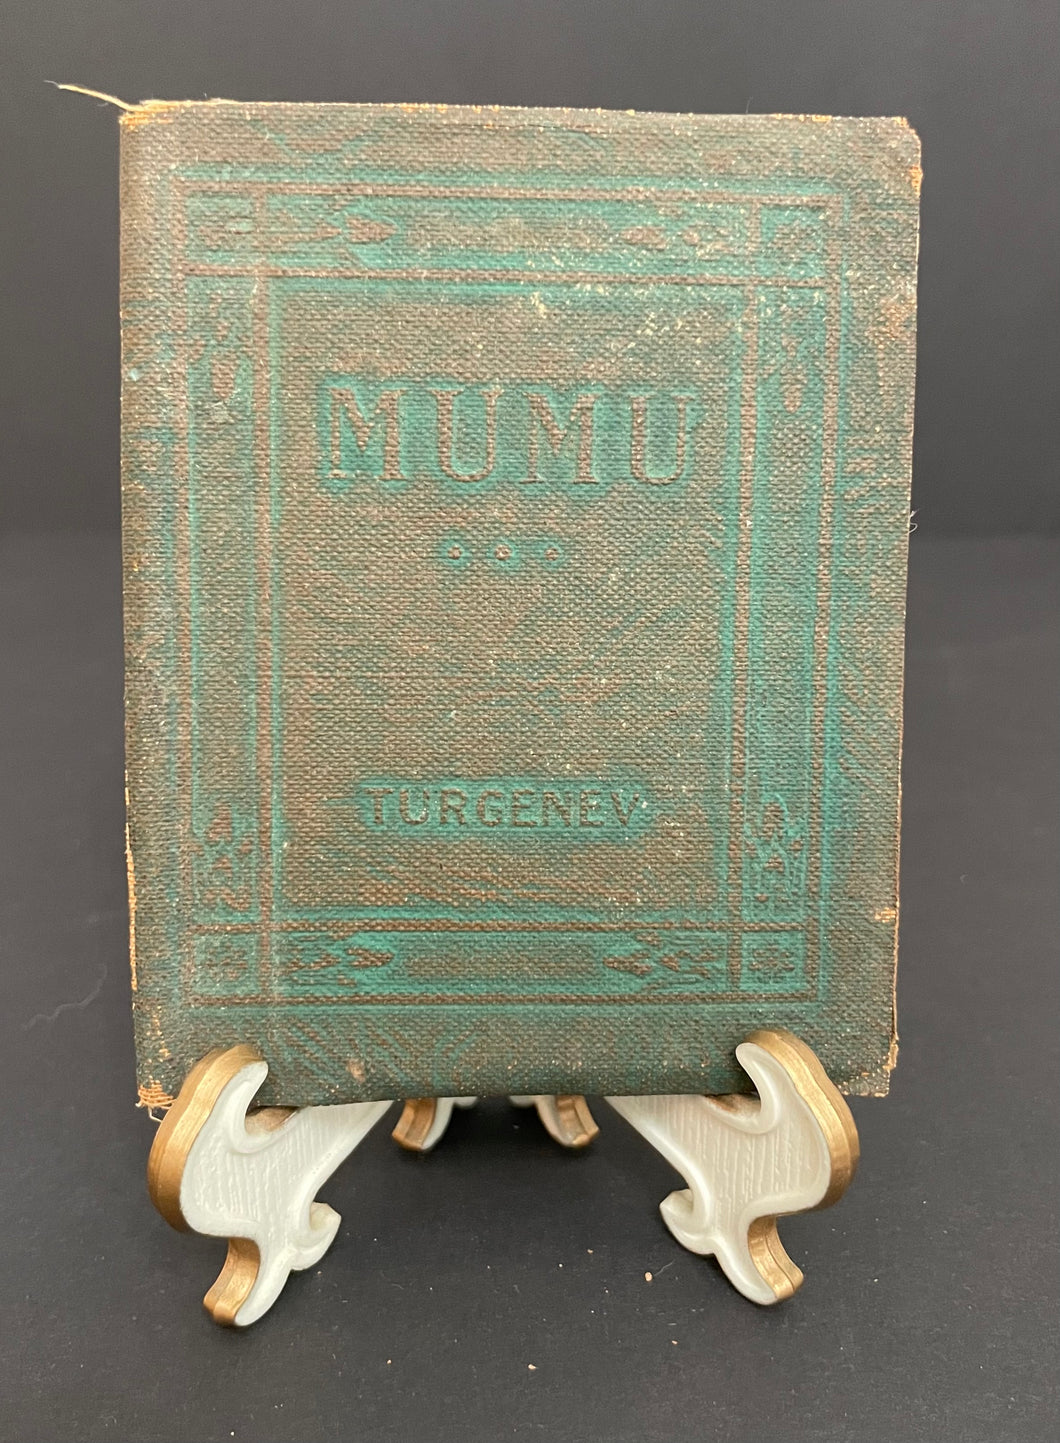 Antique Little Leather Library “Mumu” by Turgenev